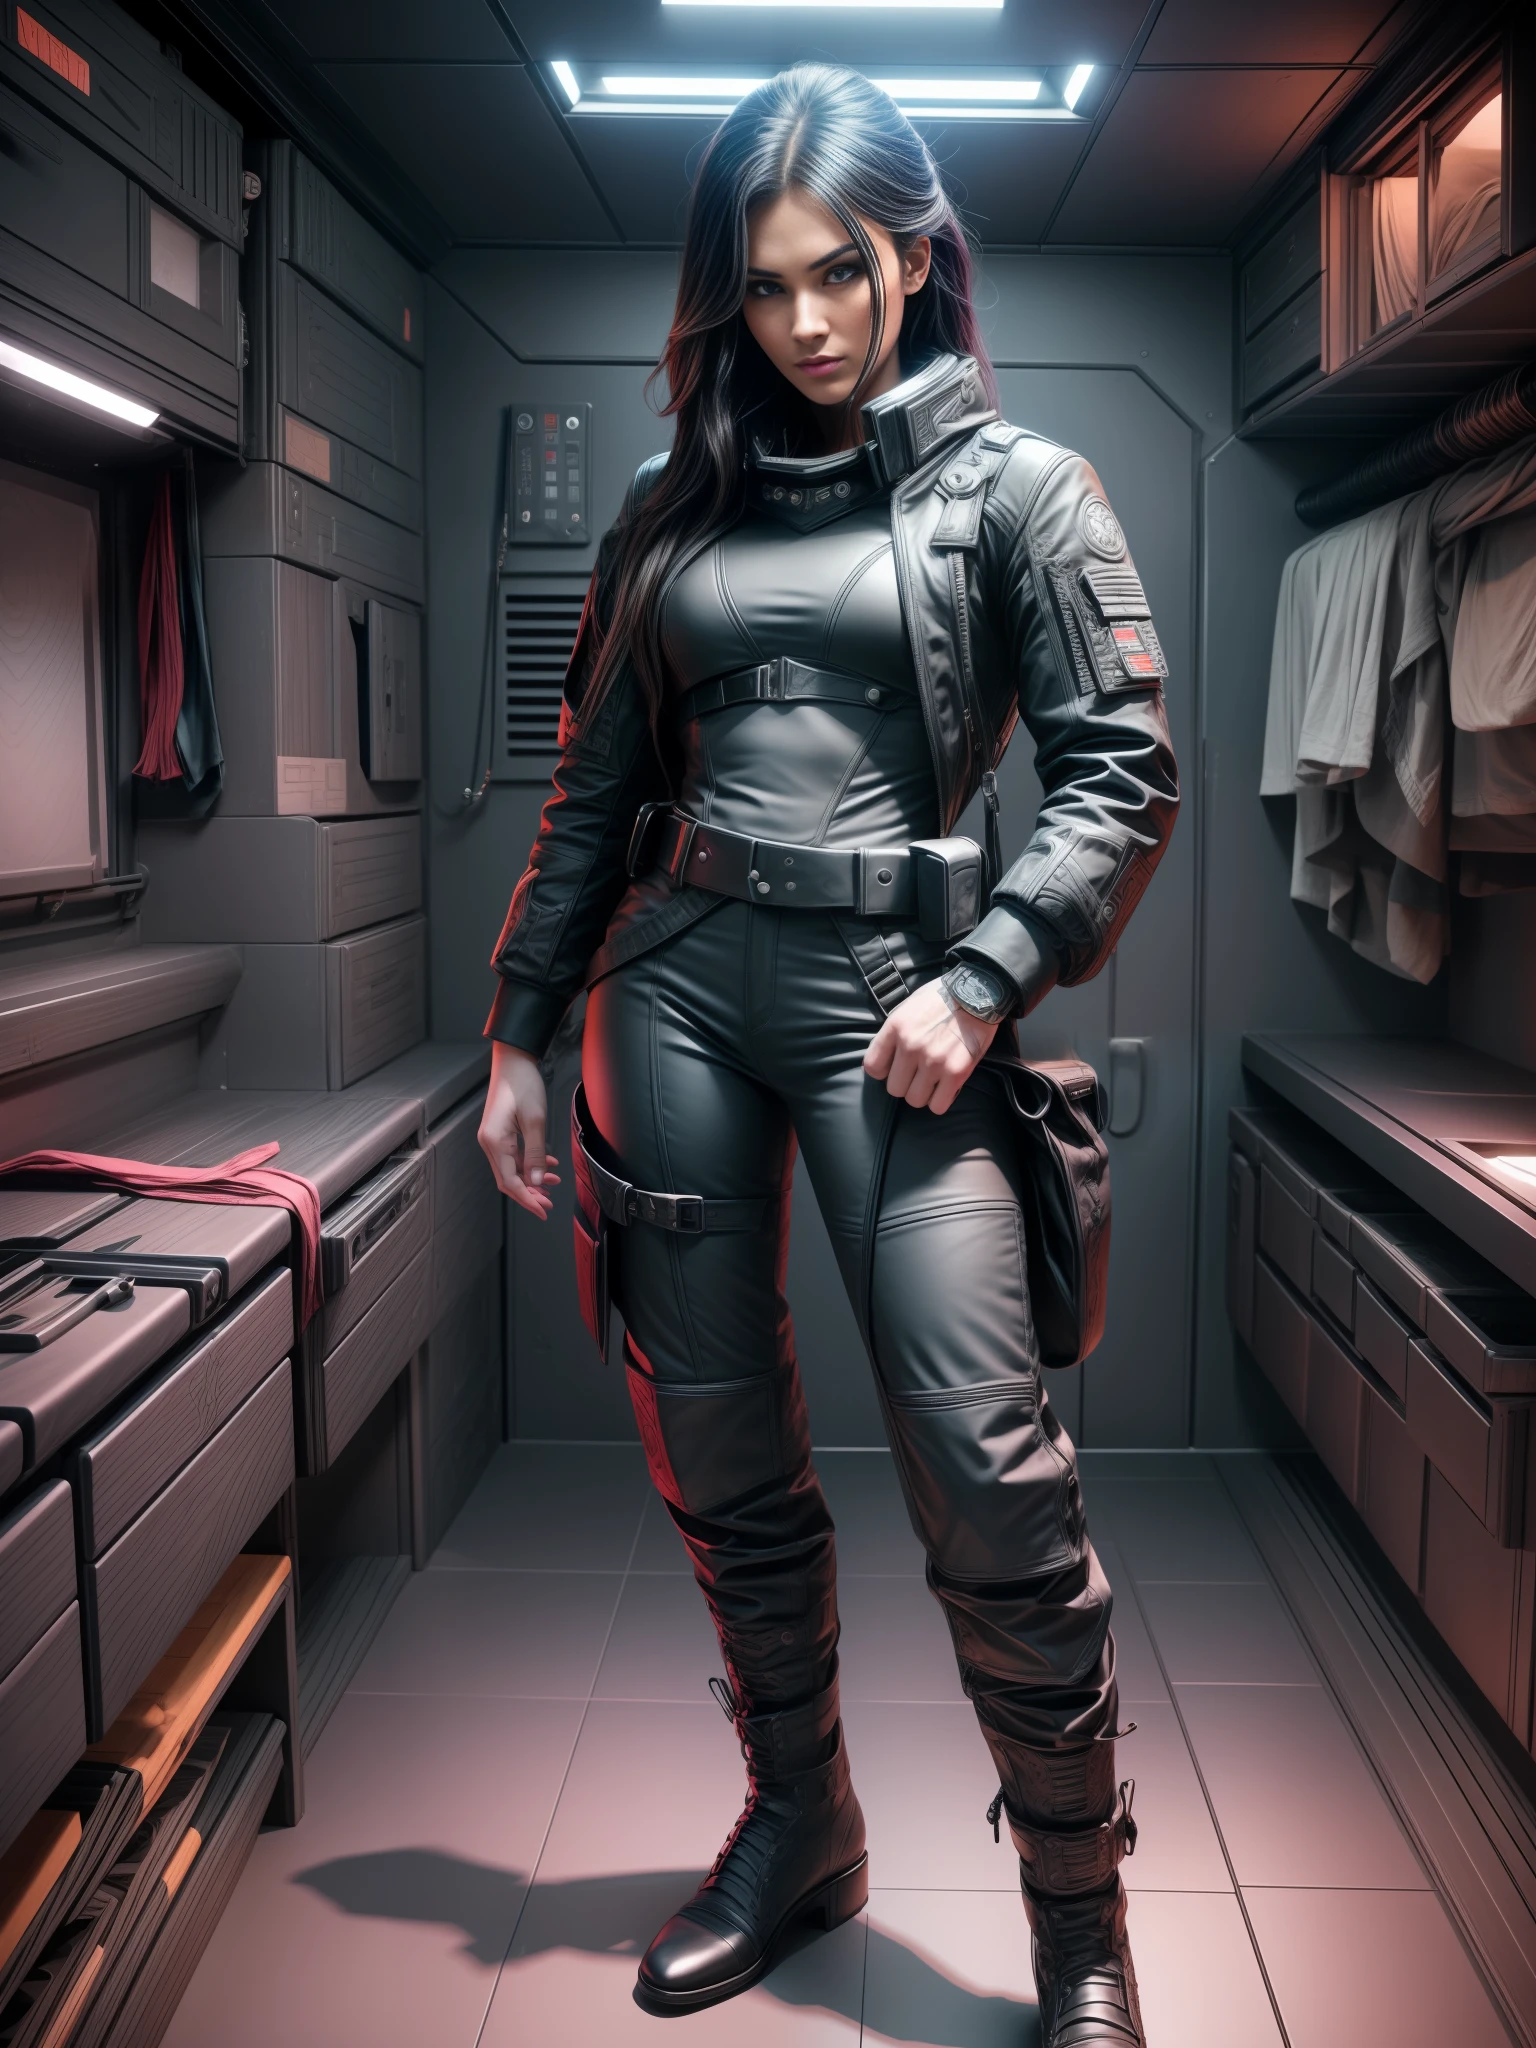 gl0w1ngR Space pirate leader, woman, 30 years old, character, standing in the black cabin of a spaceship, sci-fi, cinematic, 6d cannon, octane render, medium shot, black leather jackets, cargo pants, boots, sturdy, resilient, determined, strong, fierce, loyal, skilled, belt, resourceful, dark hair, intense, piercing eyes, muscular, non-nonsense, pragmatic, tattooed, worn, commander, authoritarian, intimidating, inflexible, confident,  striking, intense, angular, expressive look, fierce look, seductive gaze, determined gaze, strong eyeliner, mesmerizing eyes, defined cheekbones, sculpted jaw, elegant, graceful, natural beauty, magnetic, charismatic, versatile, photogenic, intricate details